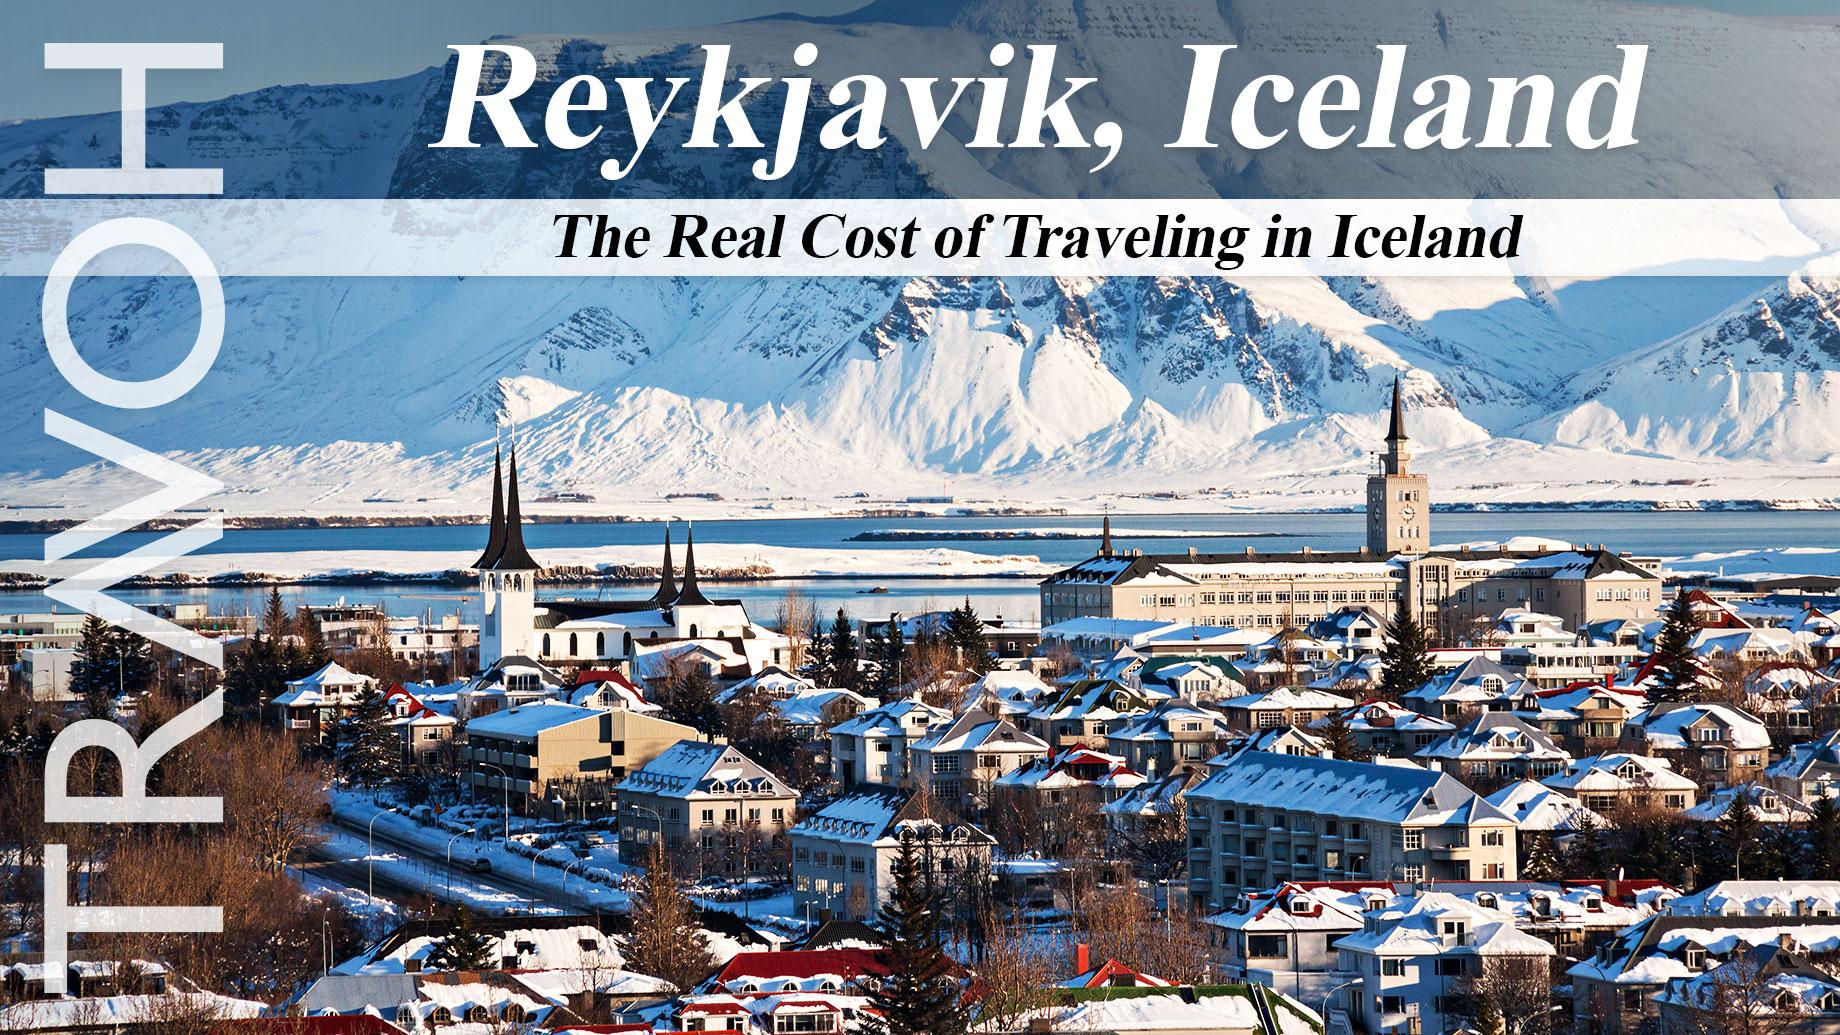 Reykjavik, Iceland - The Real Cost of Traveling in Iceland